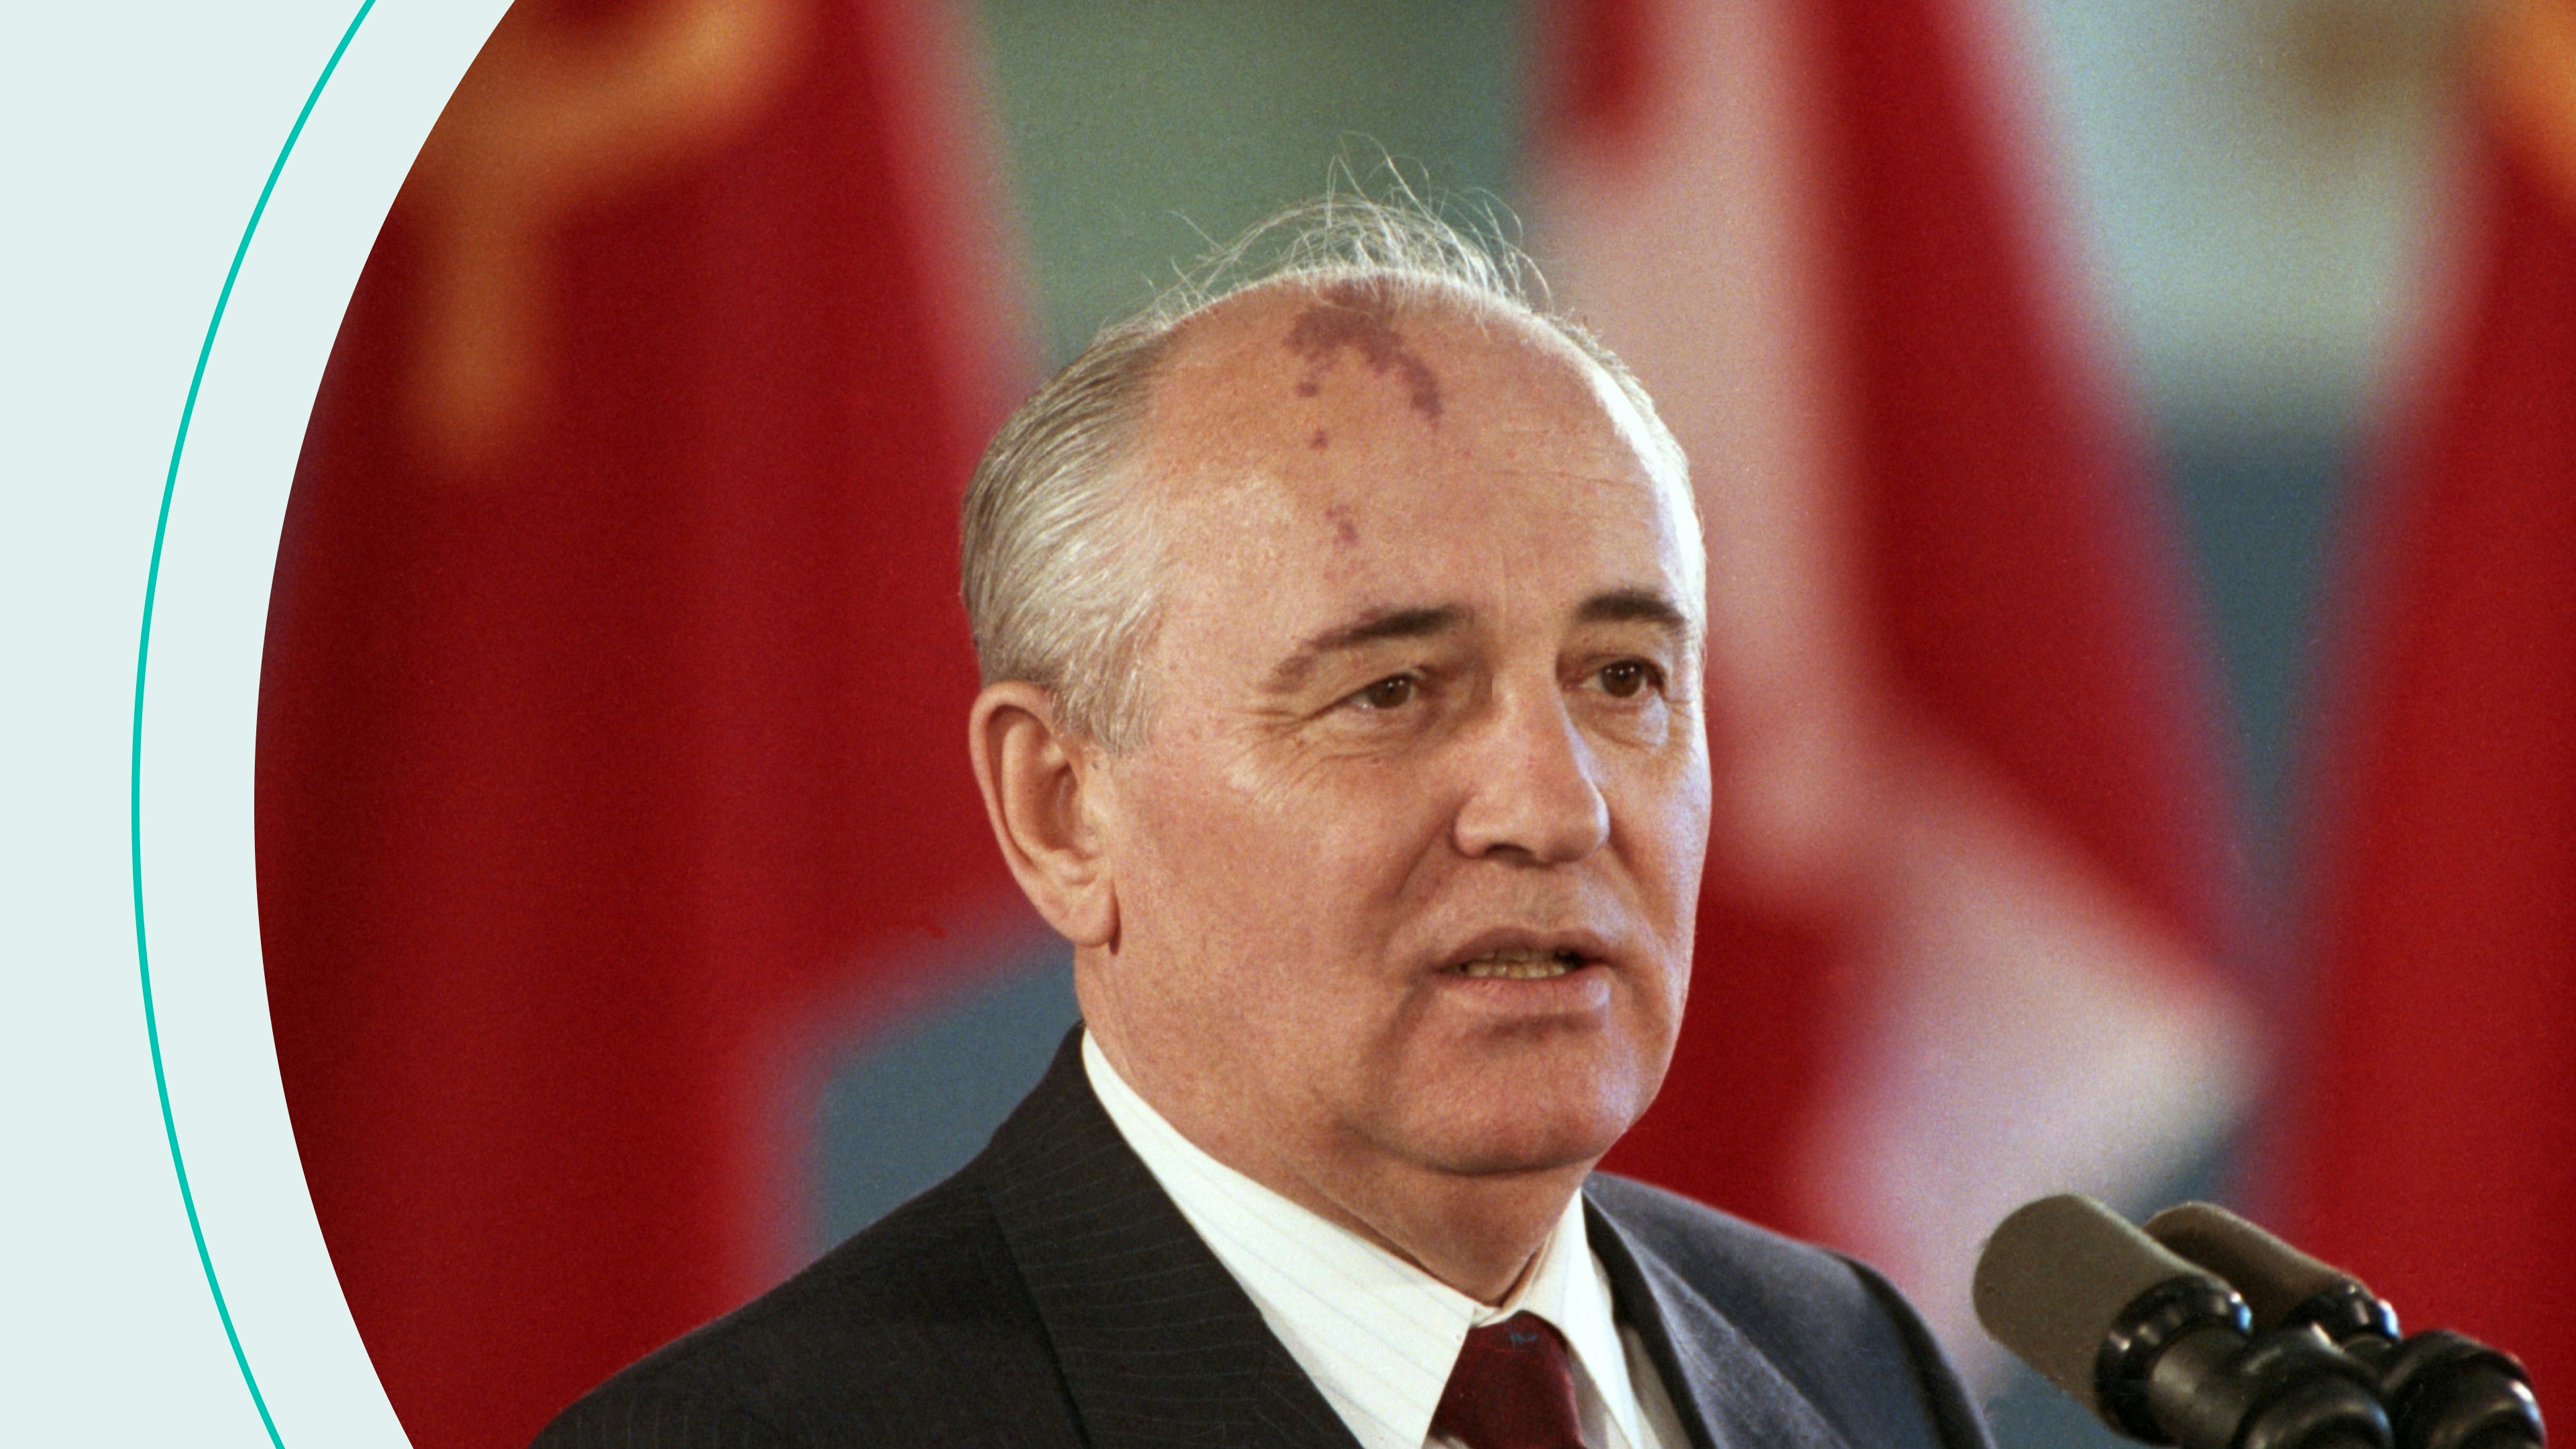 President of the Soviet Union Mikhail Gorbachev giving a speech during his visit to Ottawa, Canada, on 30th May 1990.